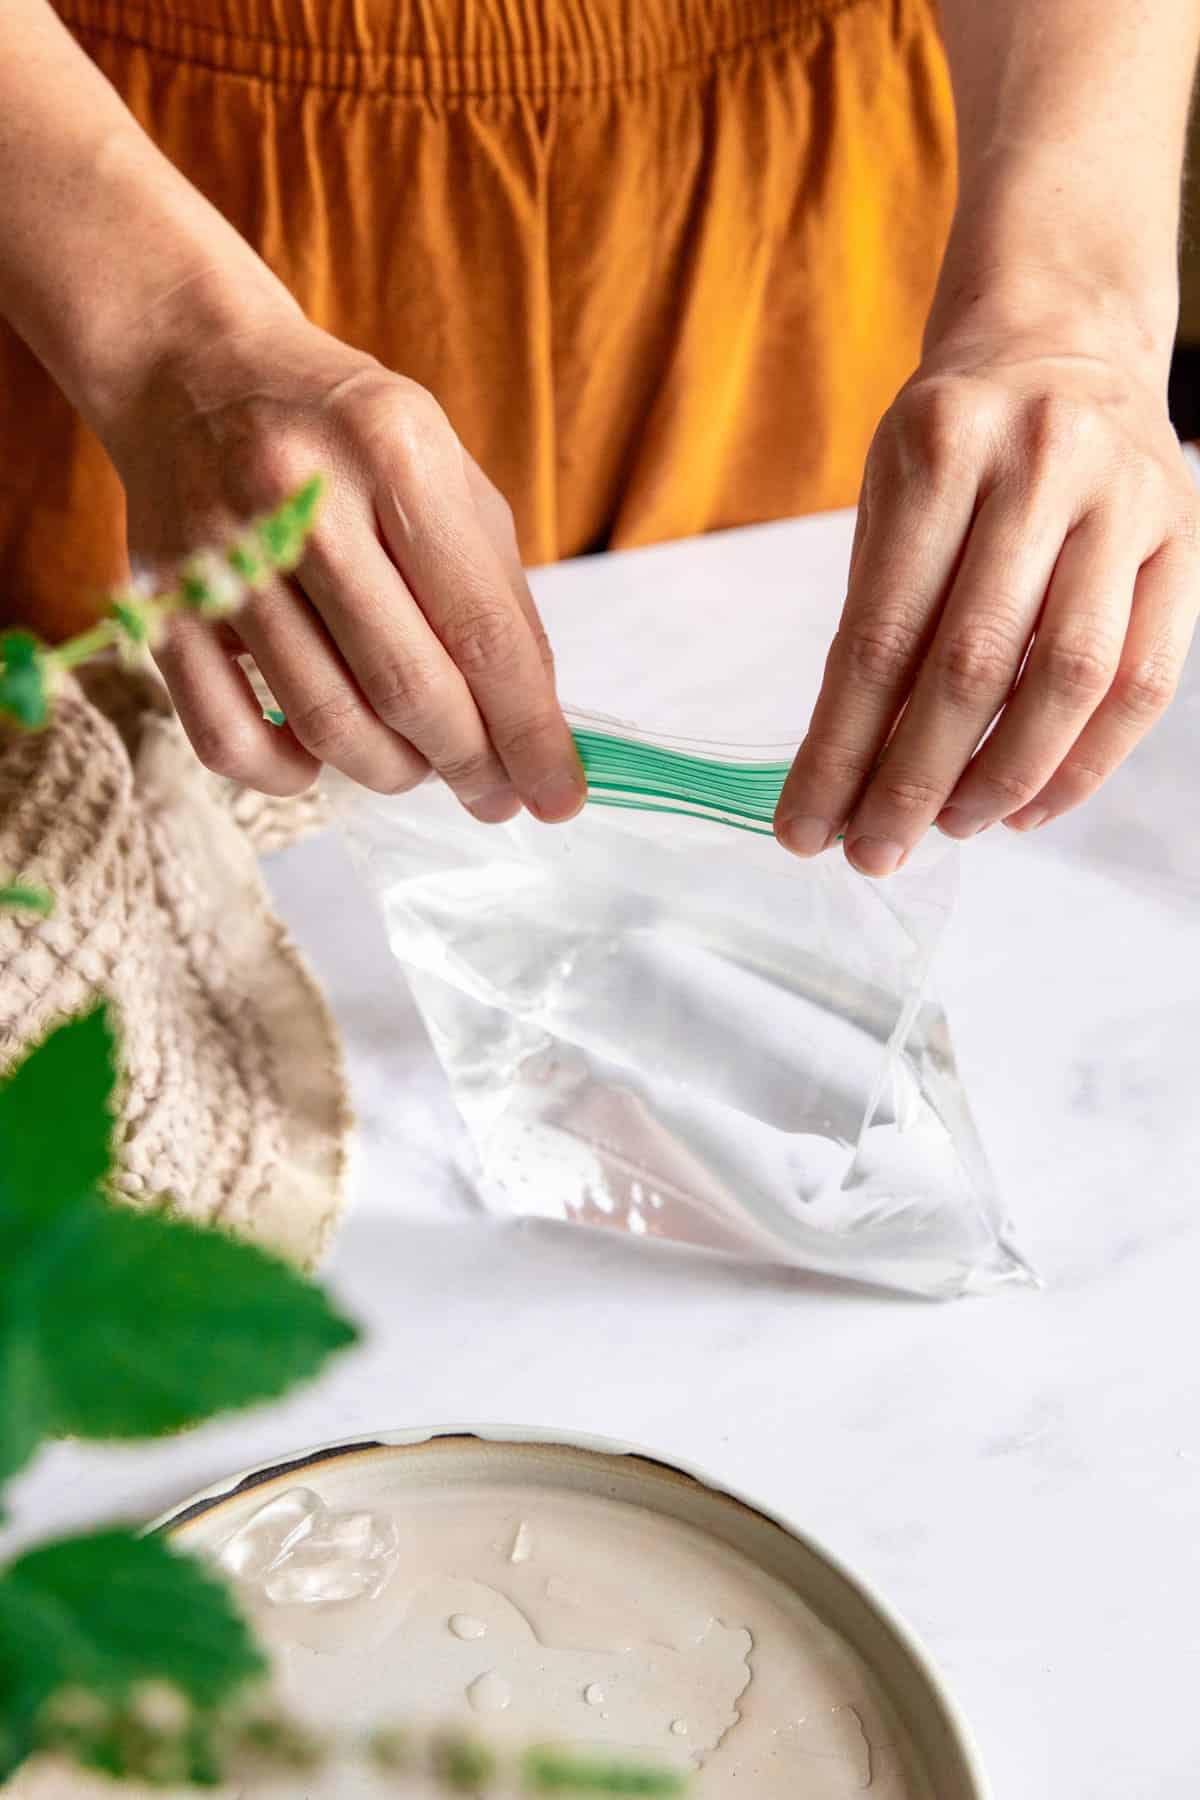 Seal the DIY ice pack and check for leaks before freezing